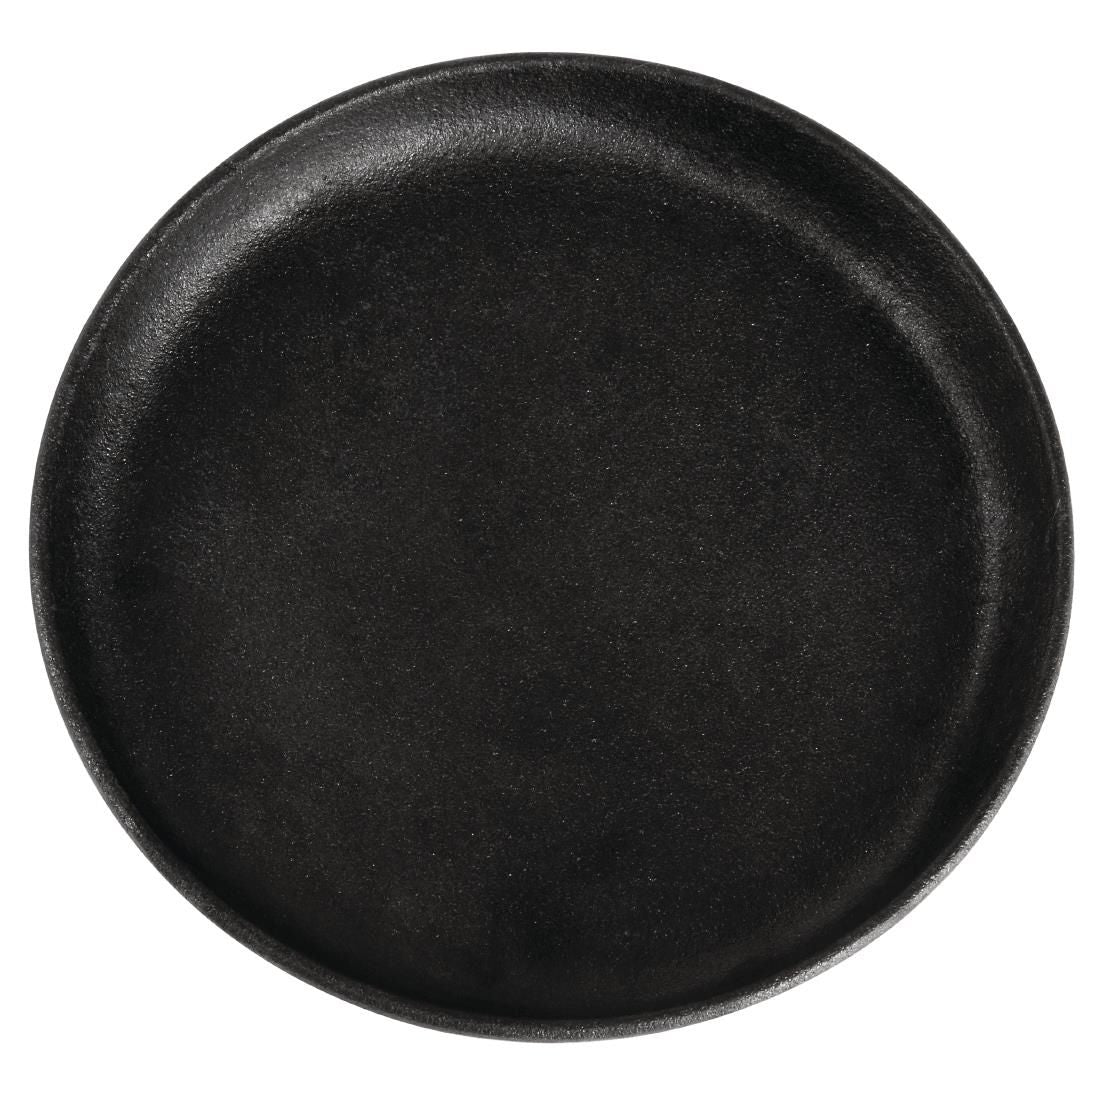 GJ556 Olympia Round Cast Iron Sizzle Platter JD Catering Equipment Solutions Ltd